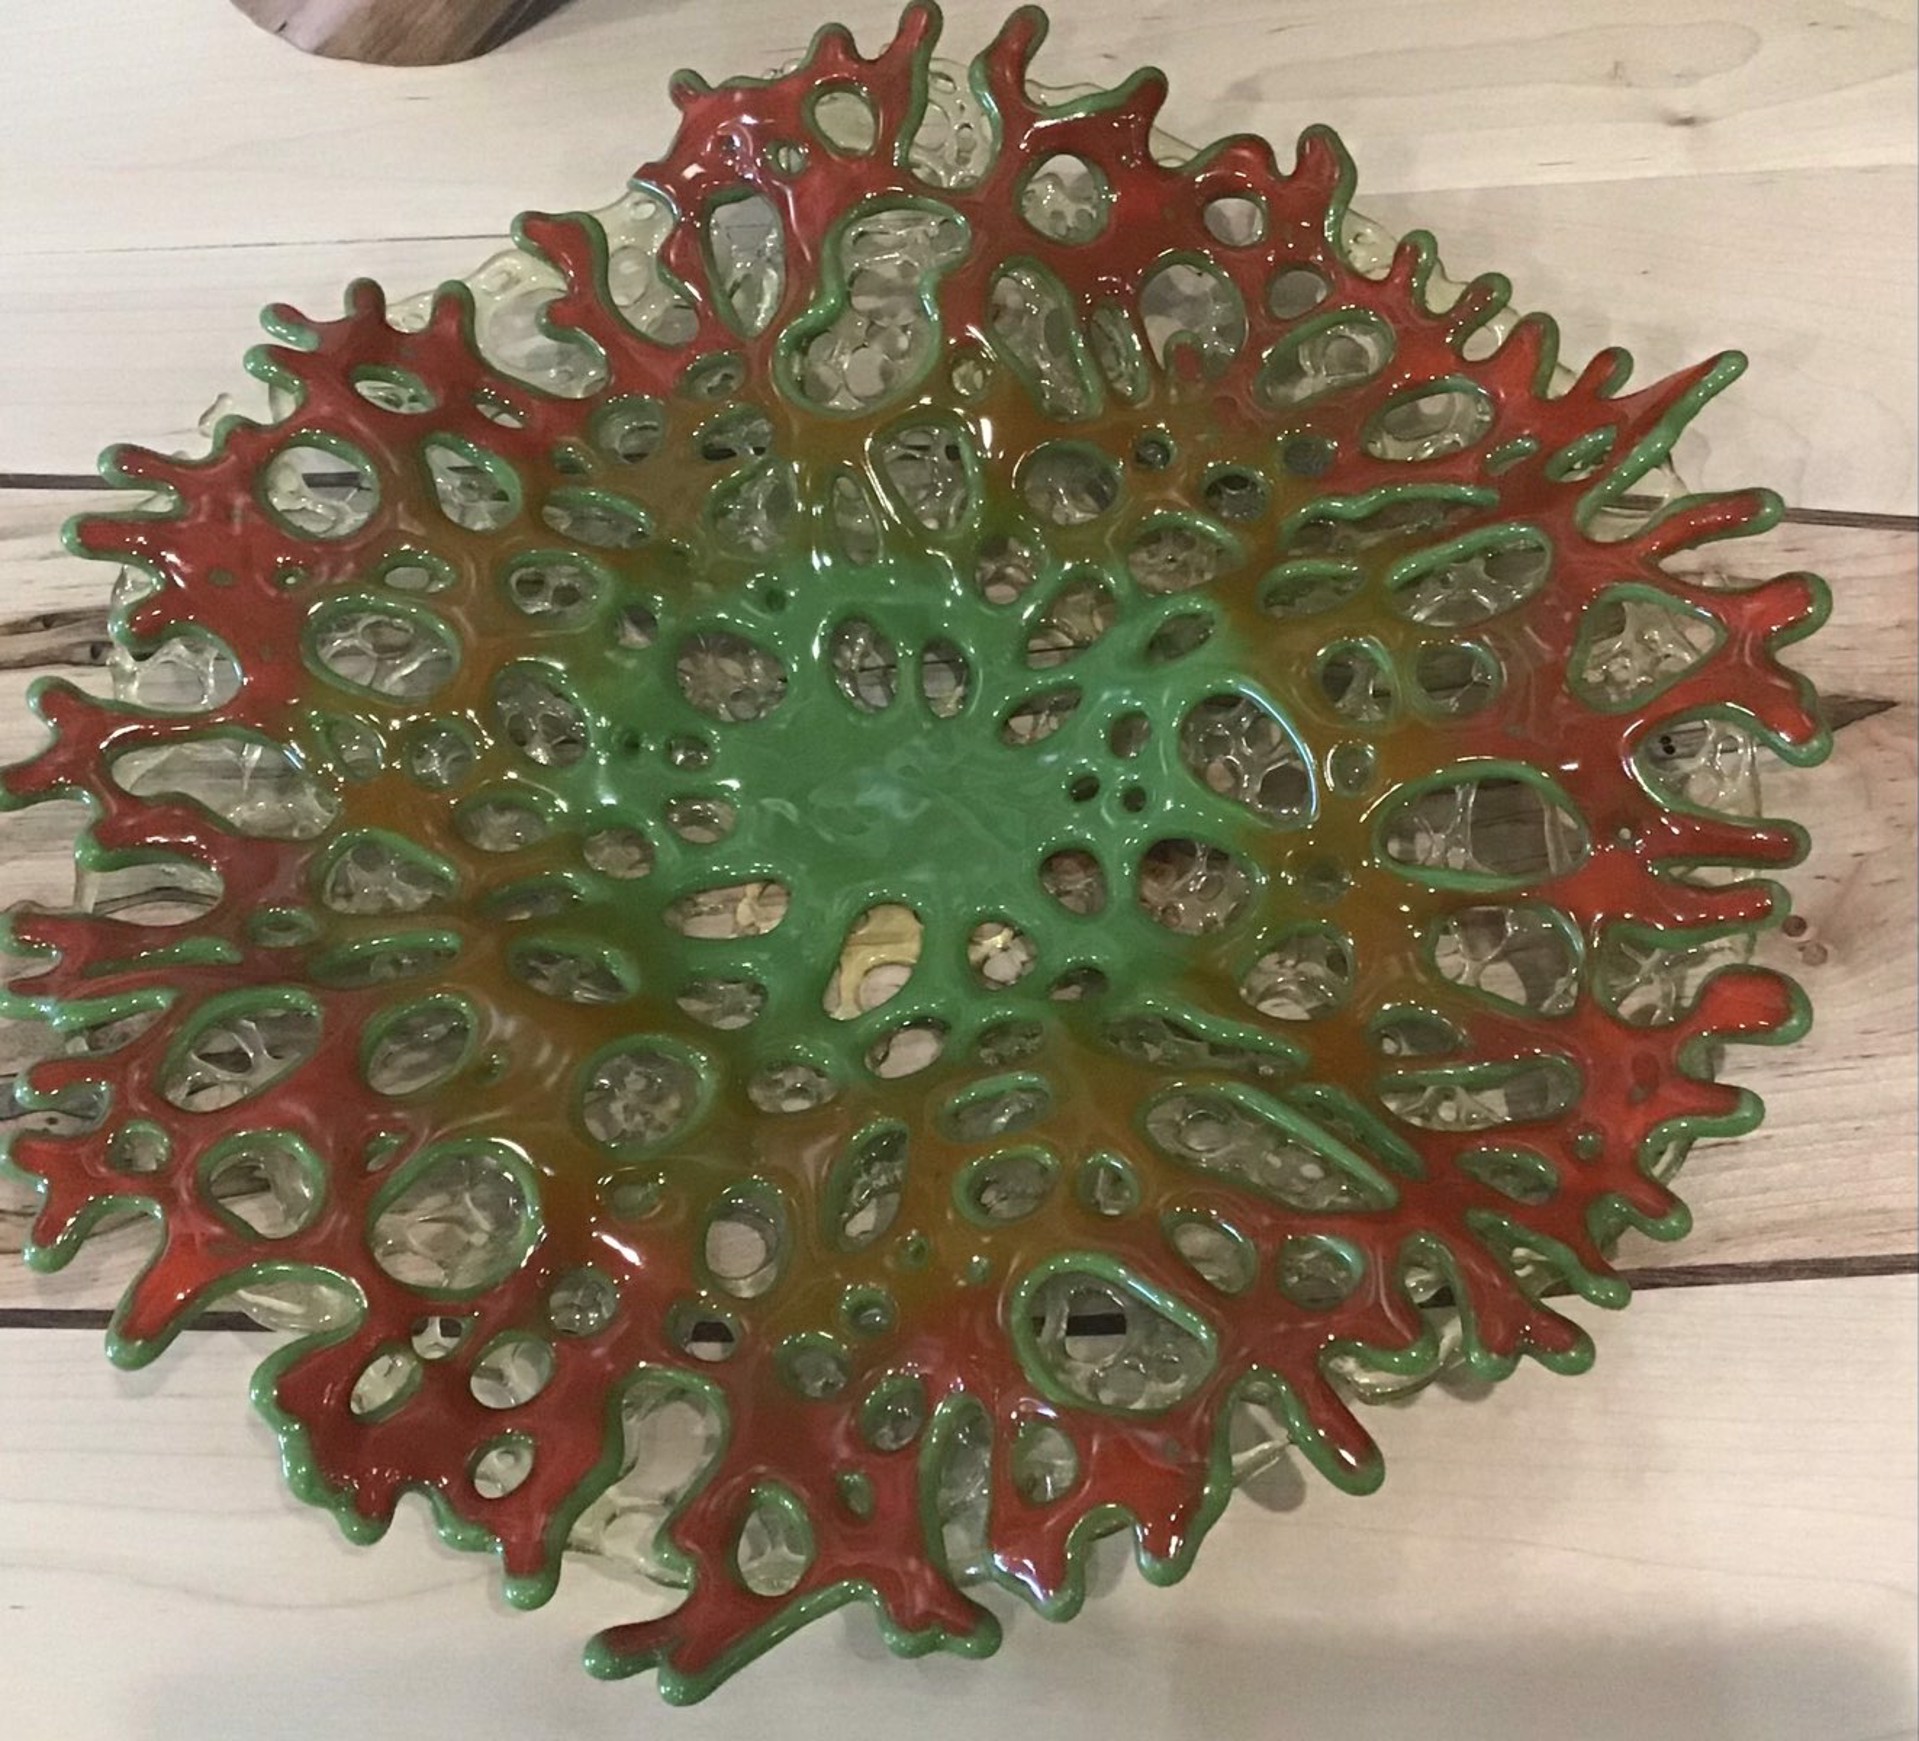 Green/Orange/Red Coral Bowl with lace edge by Marian Pyron